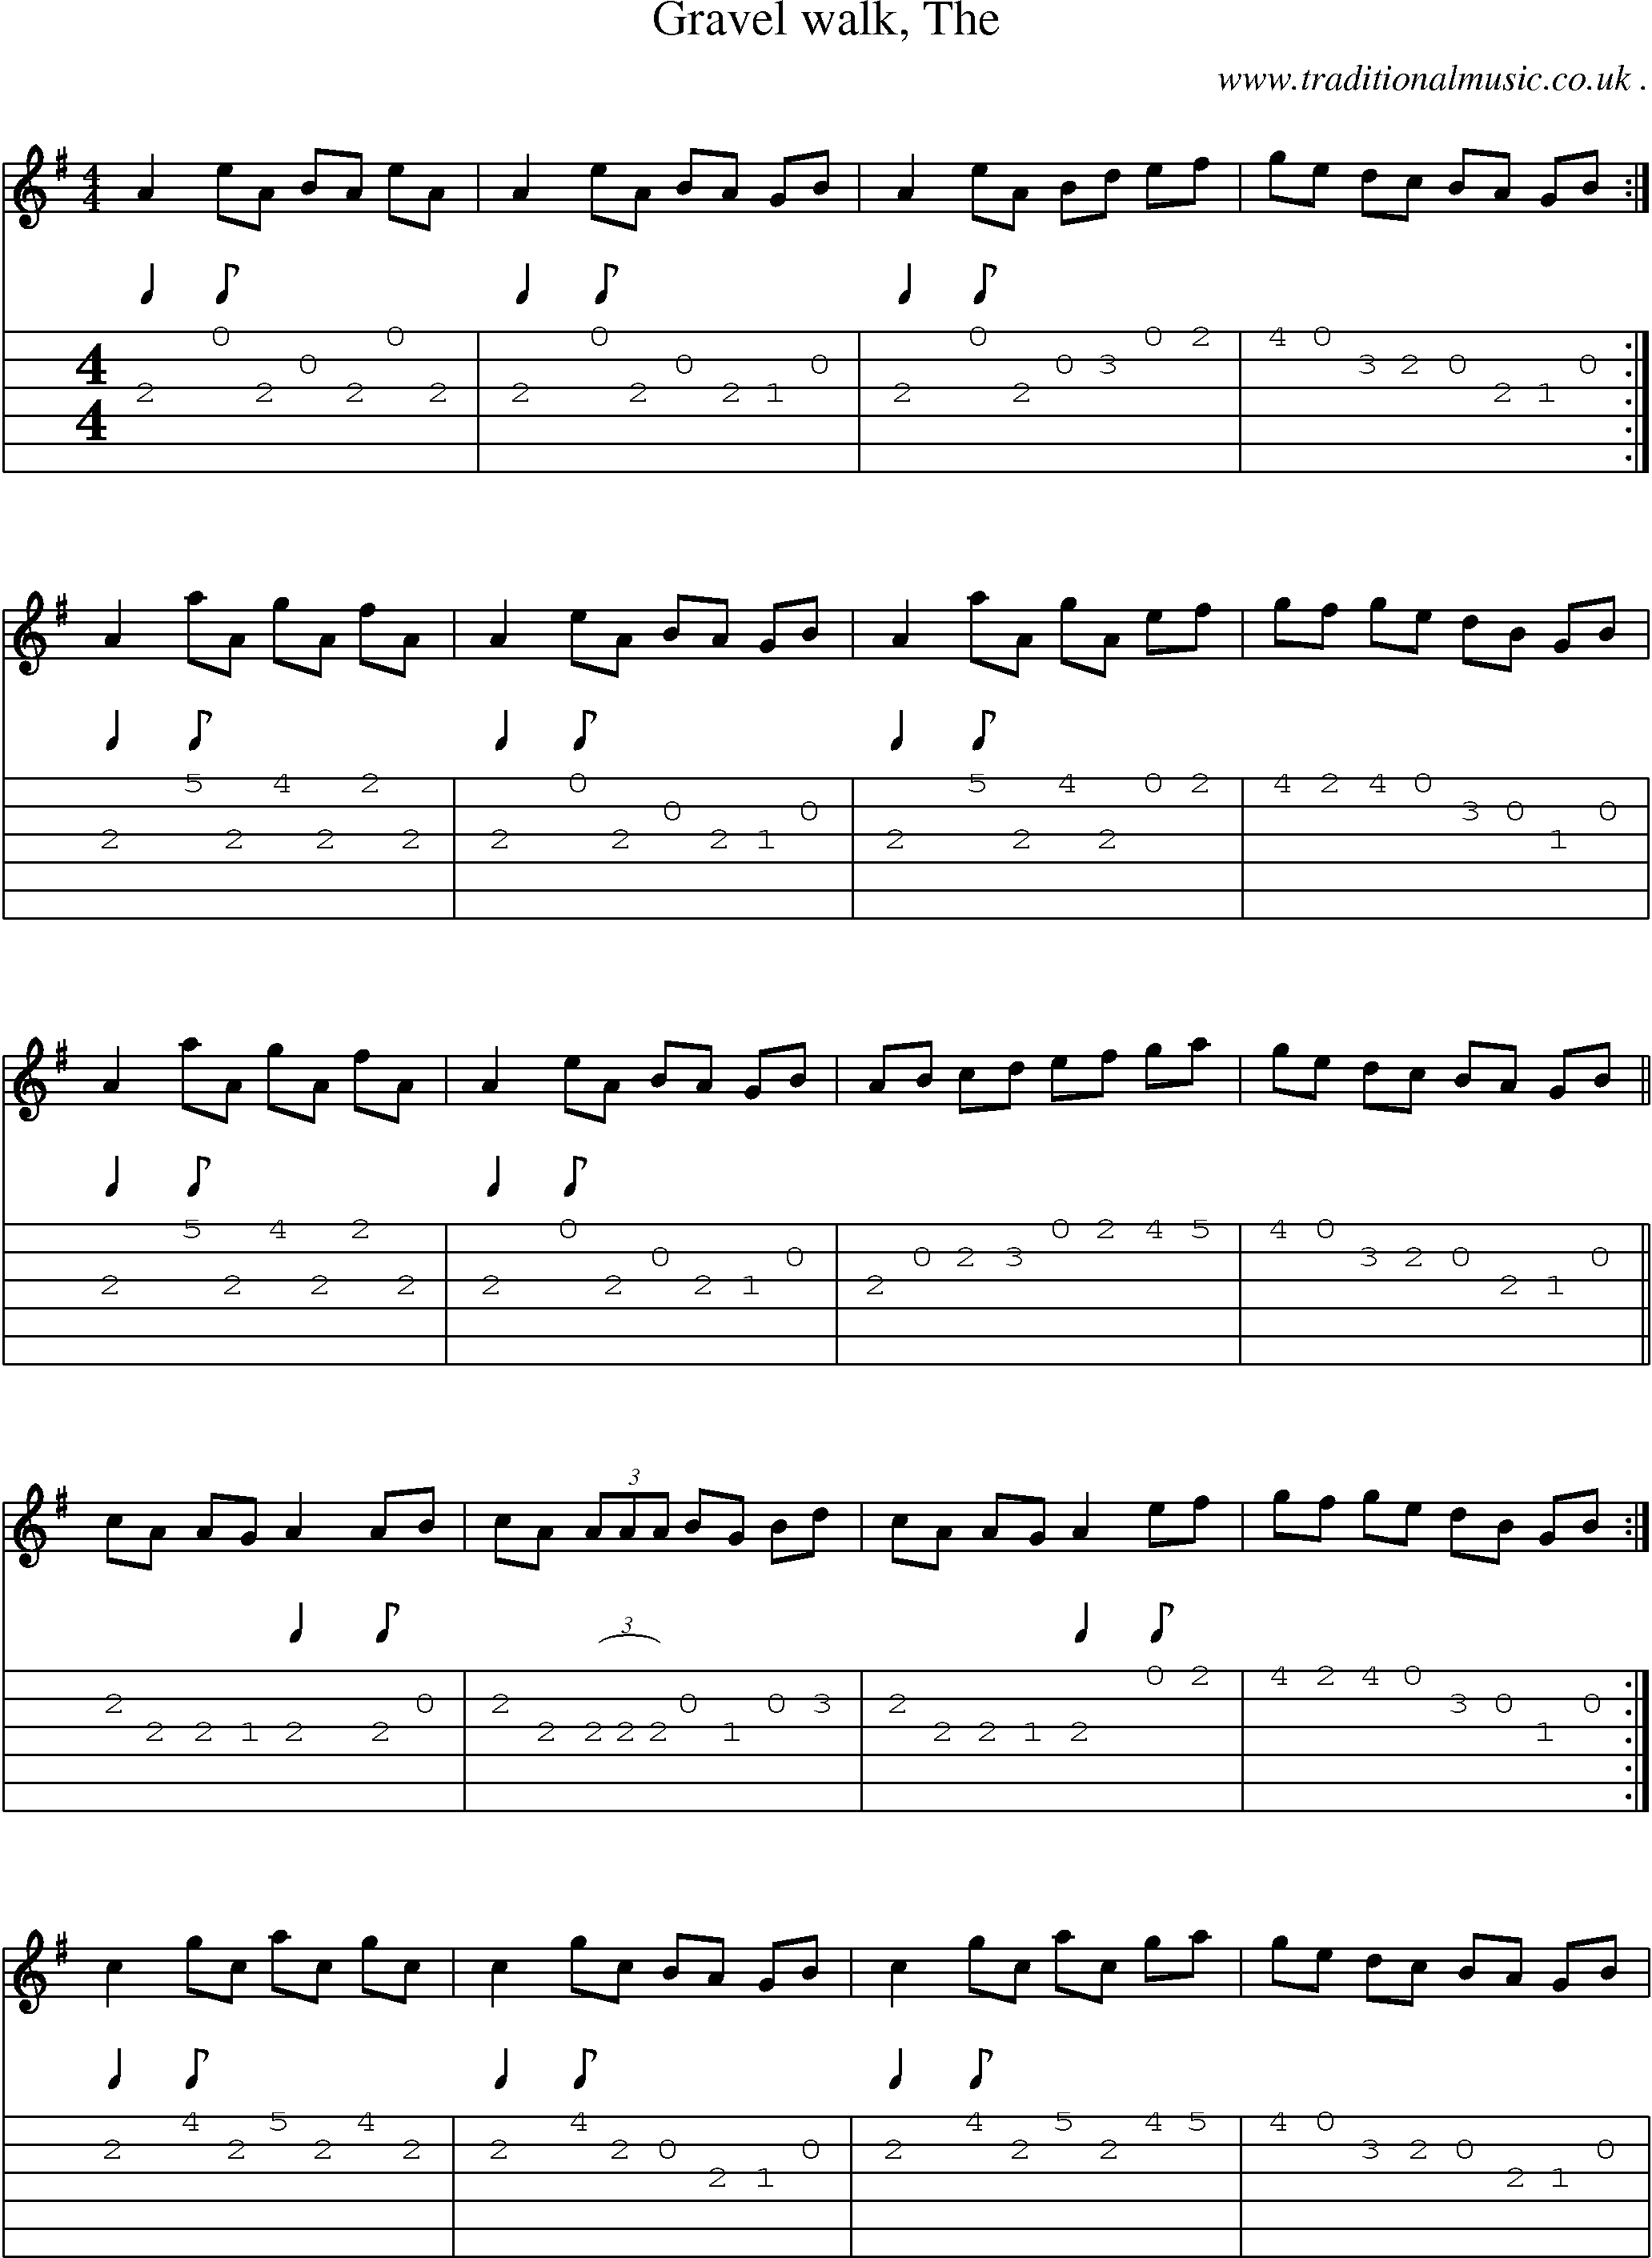 Sheet-music  score, Chords and Guitar Tabs for Gravel Walk The